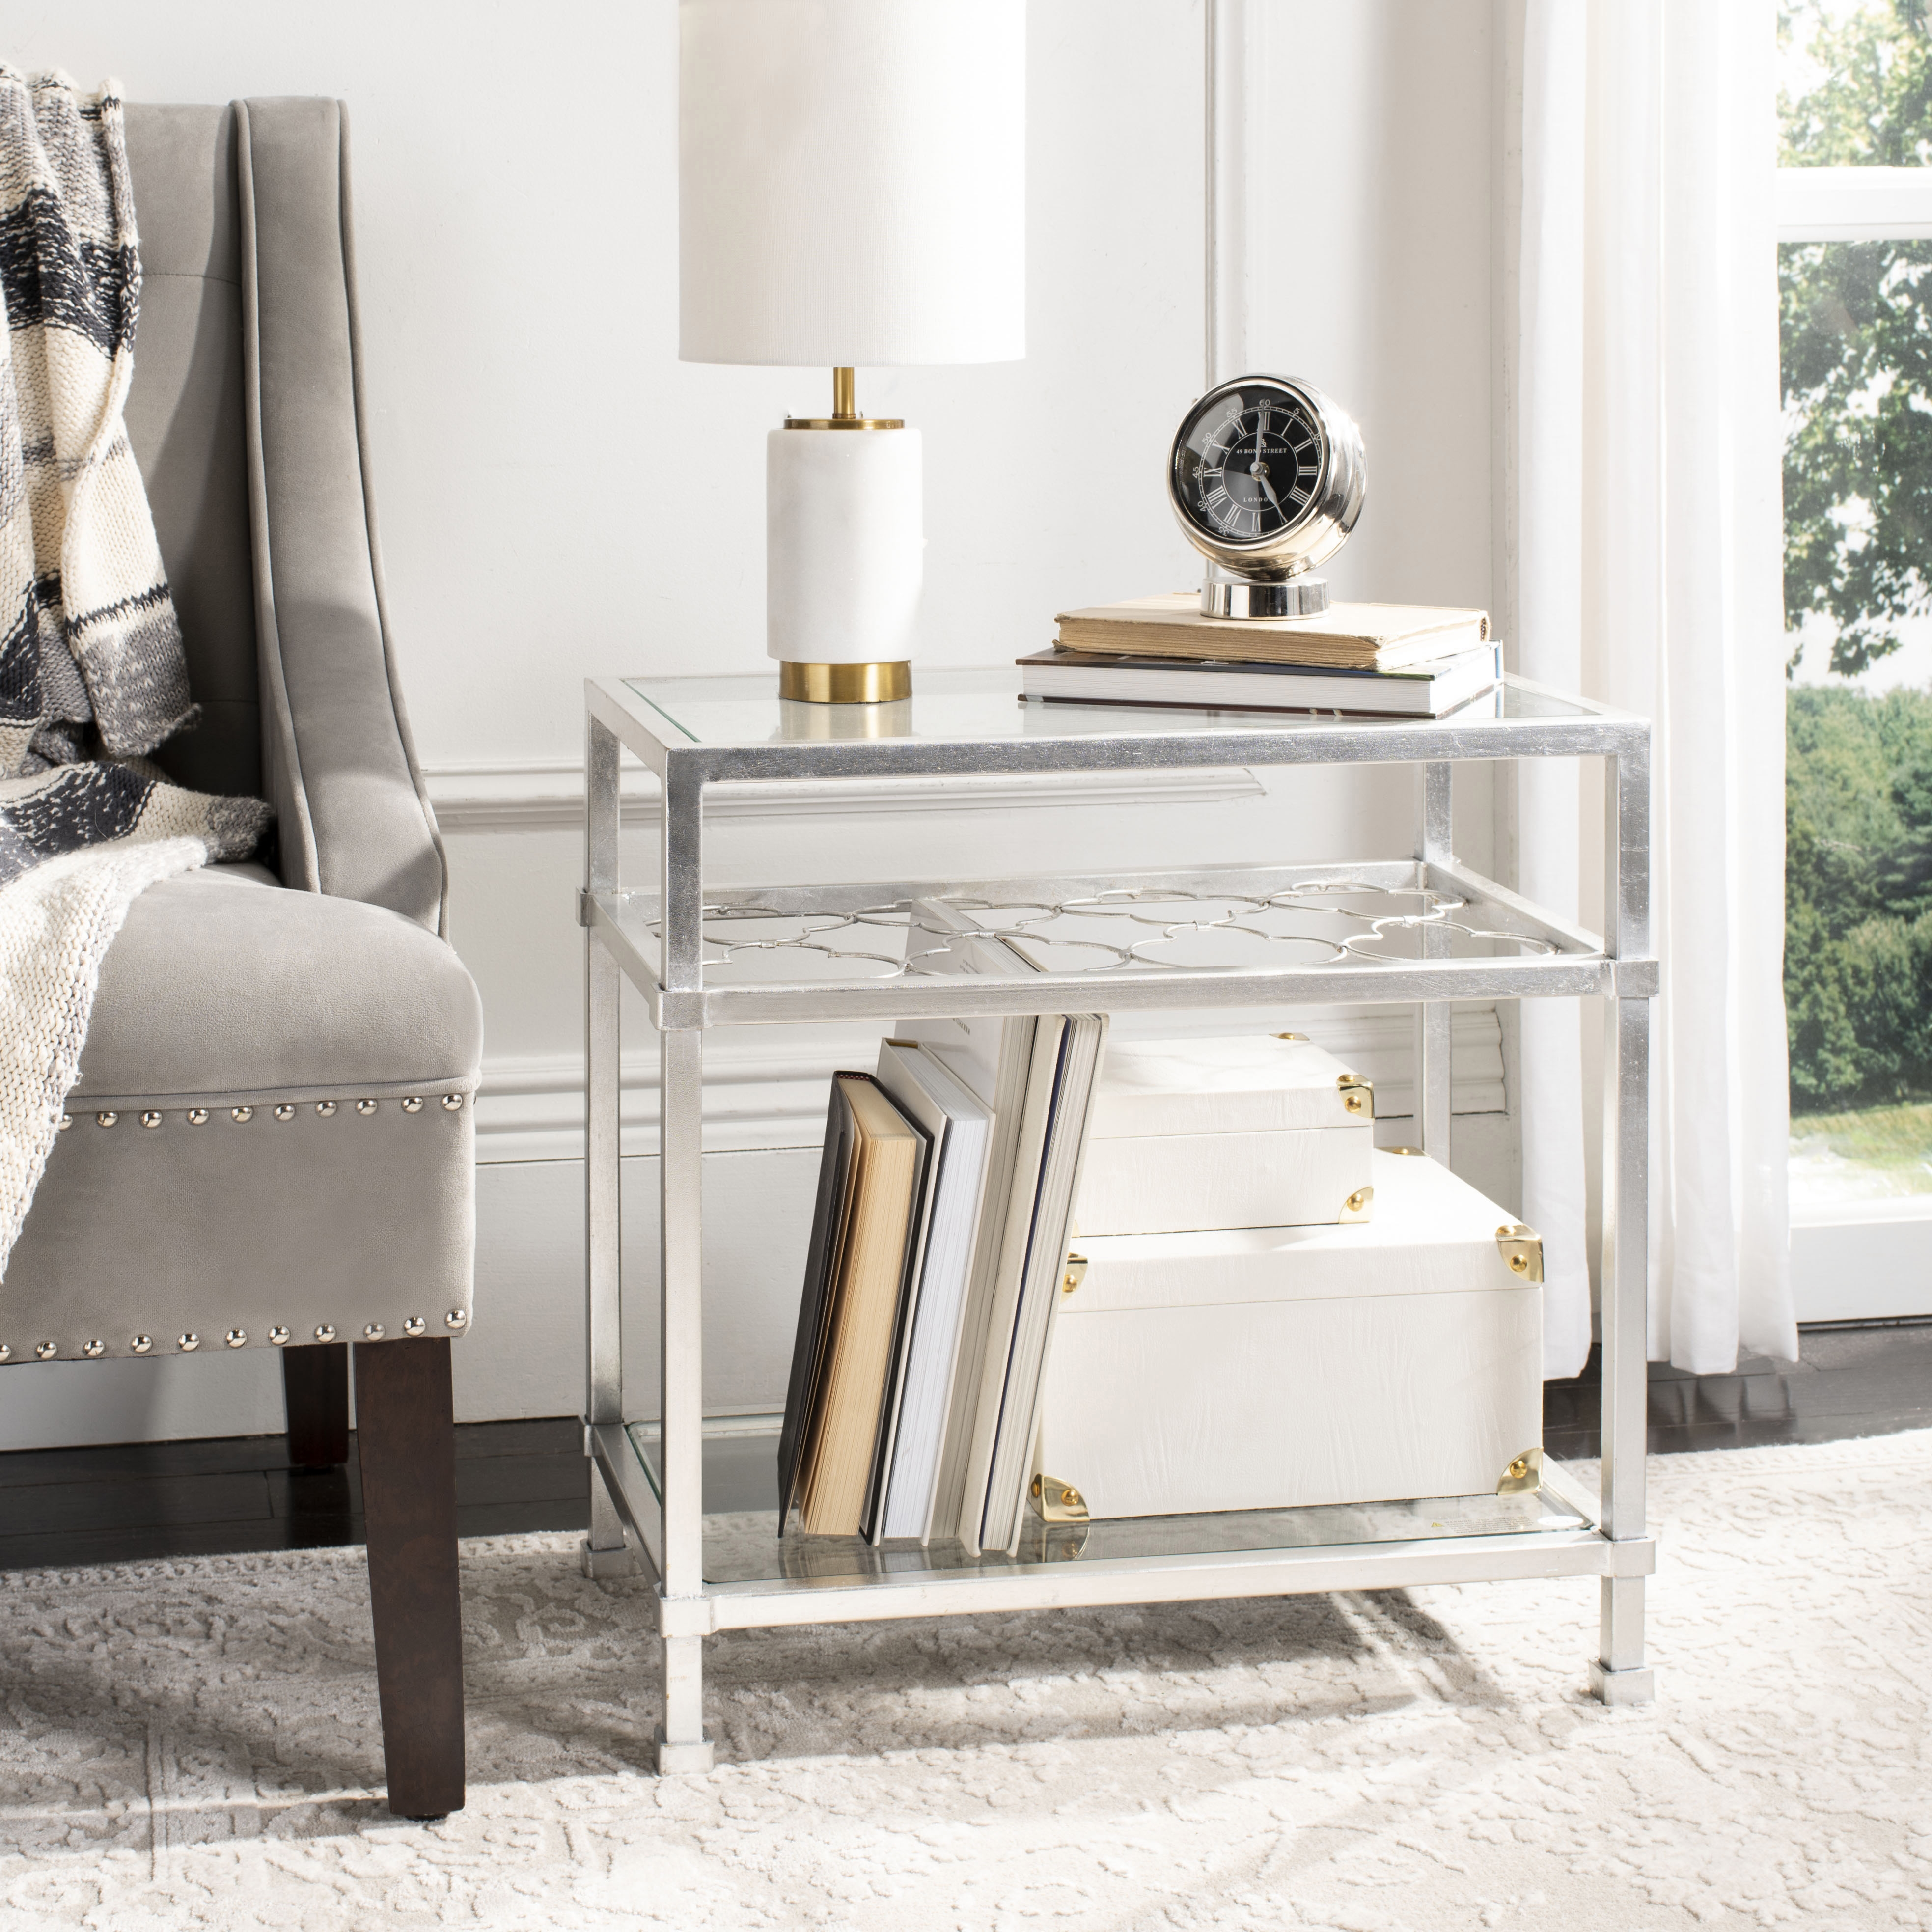 Hanzel Silver Leaf Glass Side Table - Silver - Arlo Home - Image 5